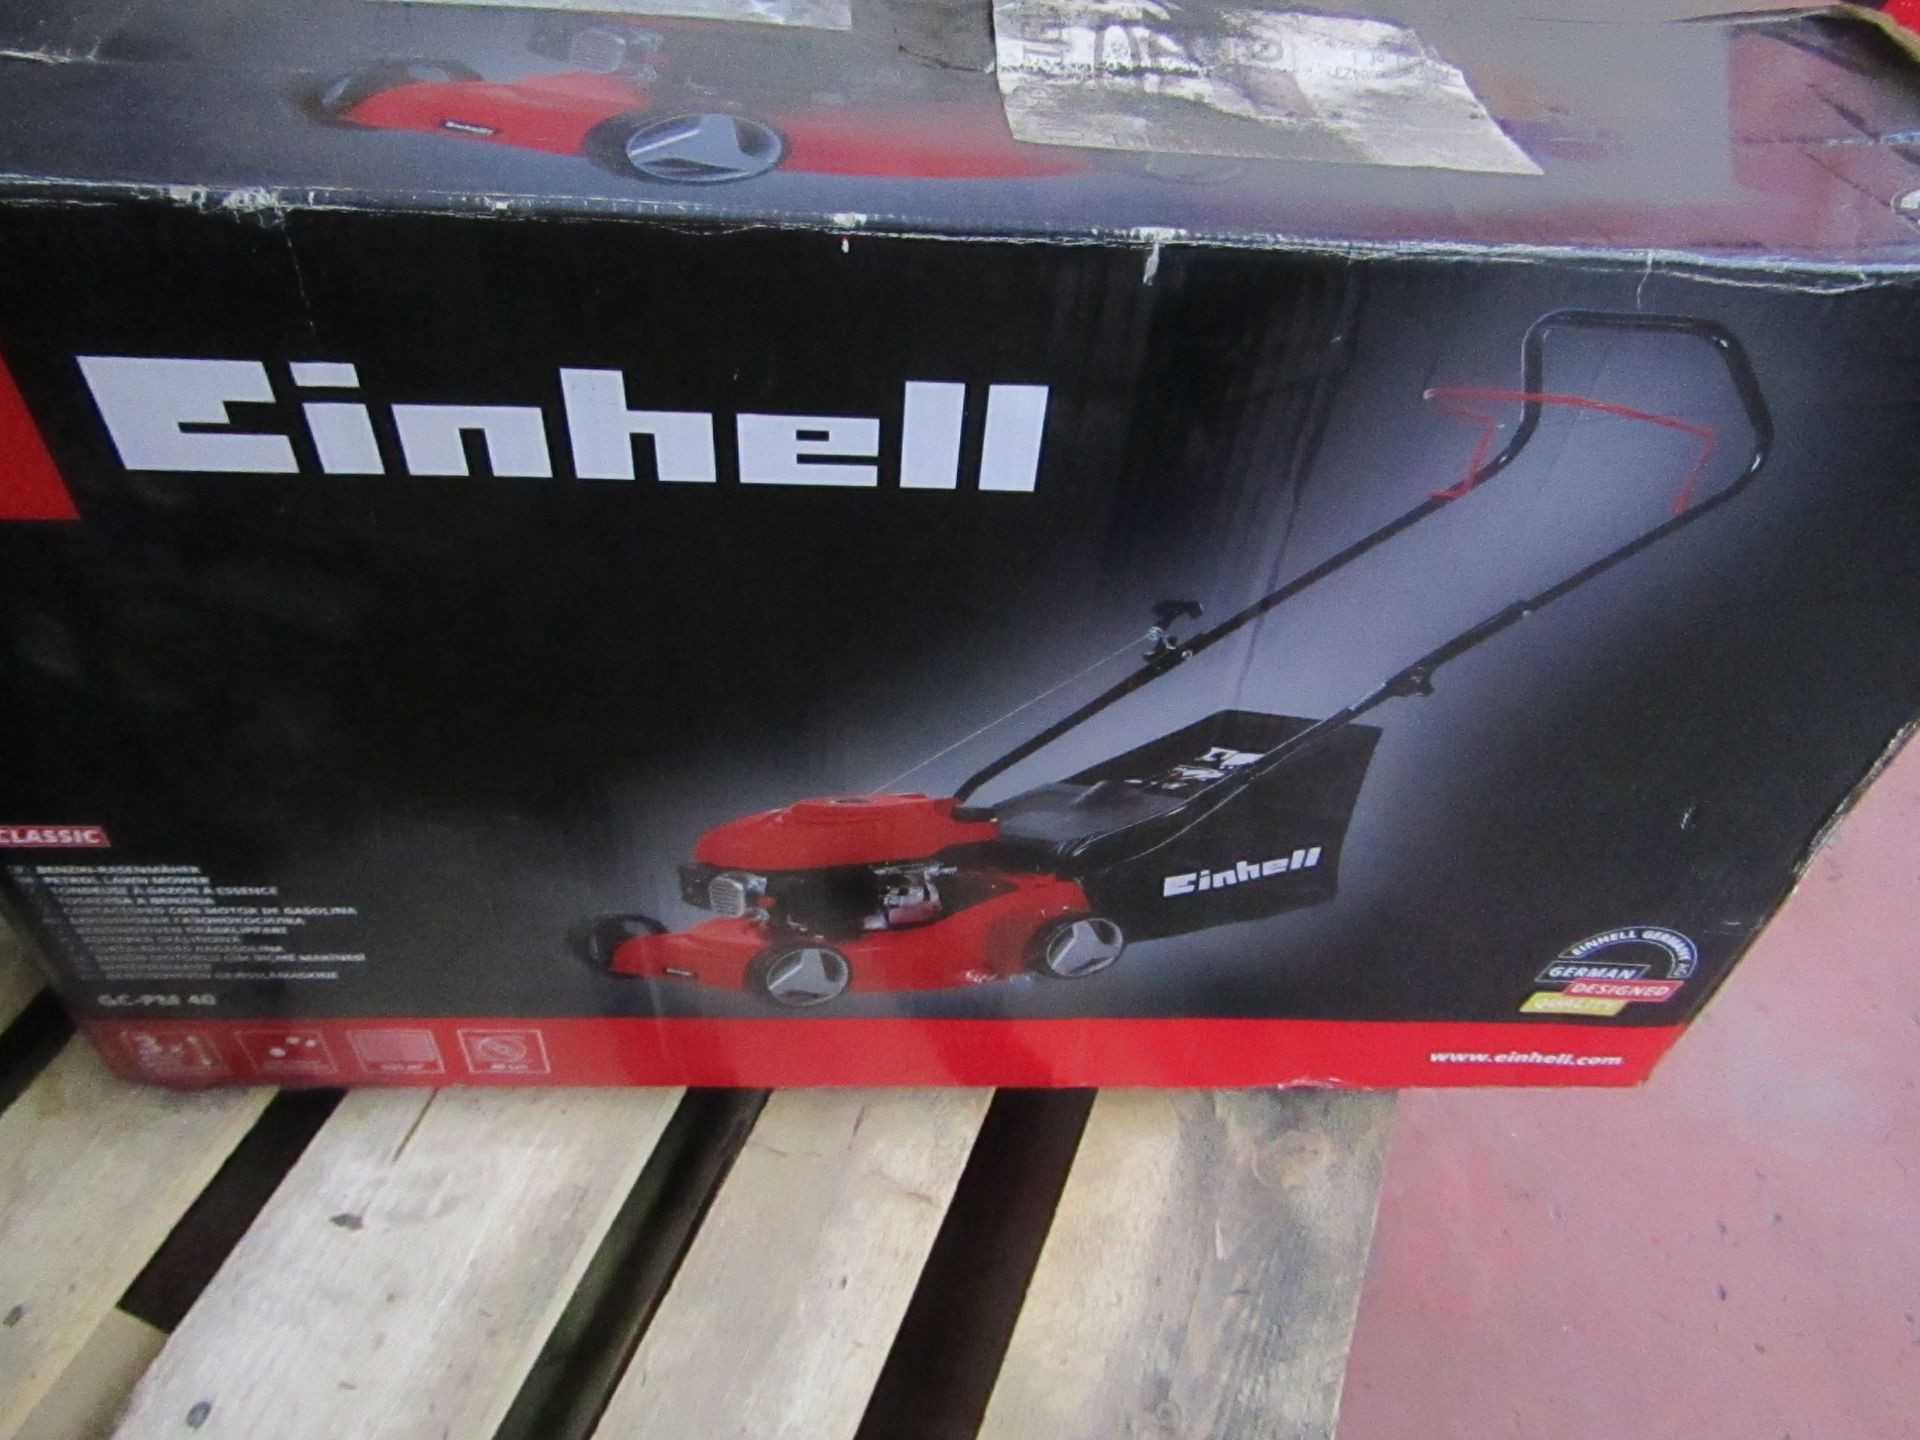 1x Einhell GC-PM 40/1 40cm petrol lawn mower - unchecked & boxed ( box is damaged )- If unsure